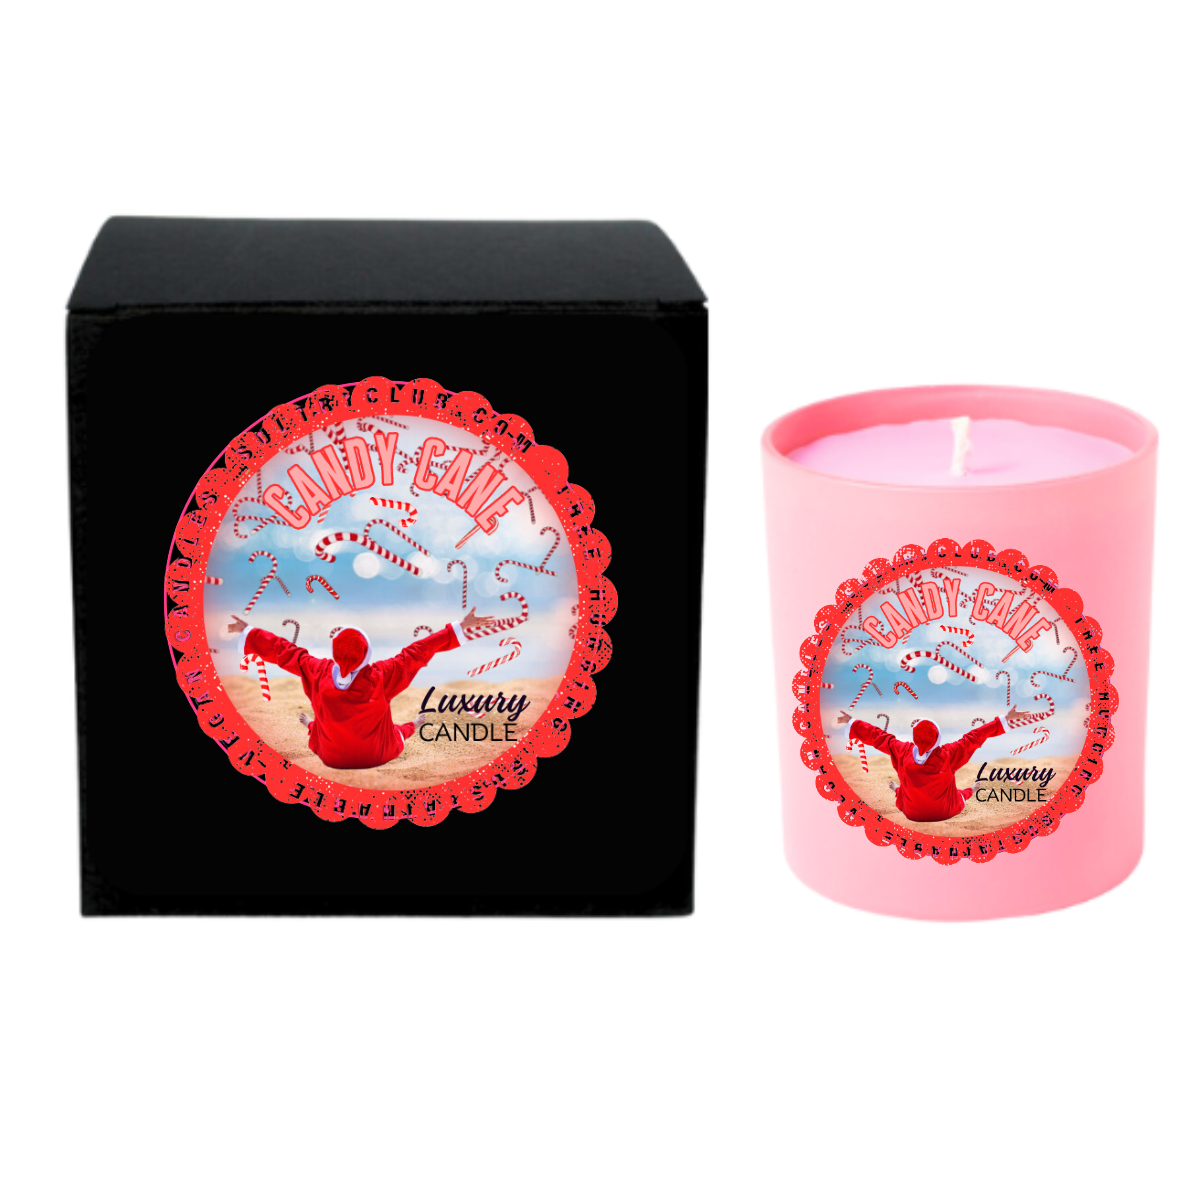 Candy Cane Holiday Candle And Wax Melts